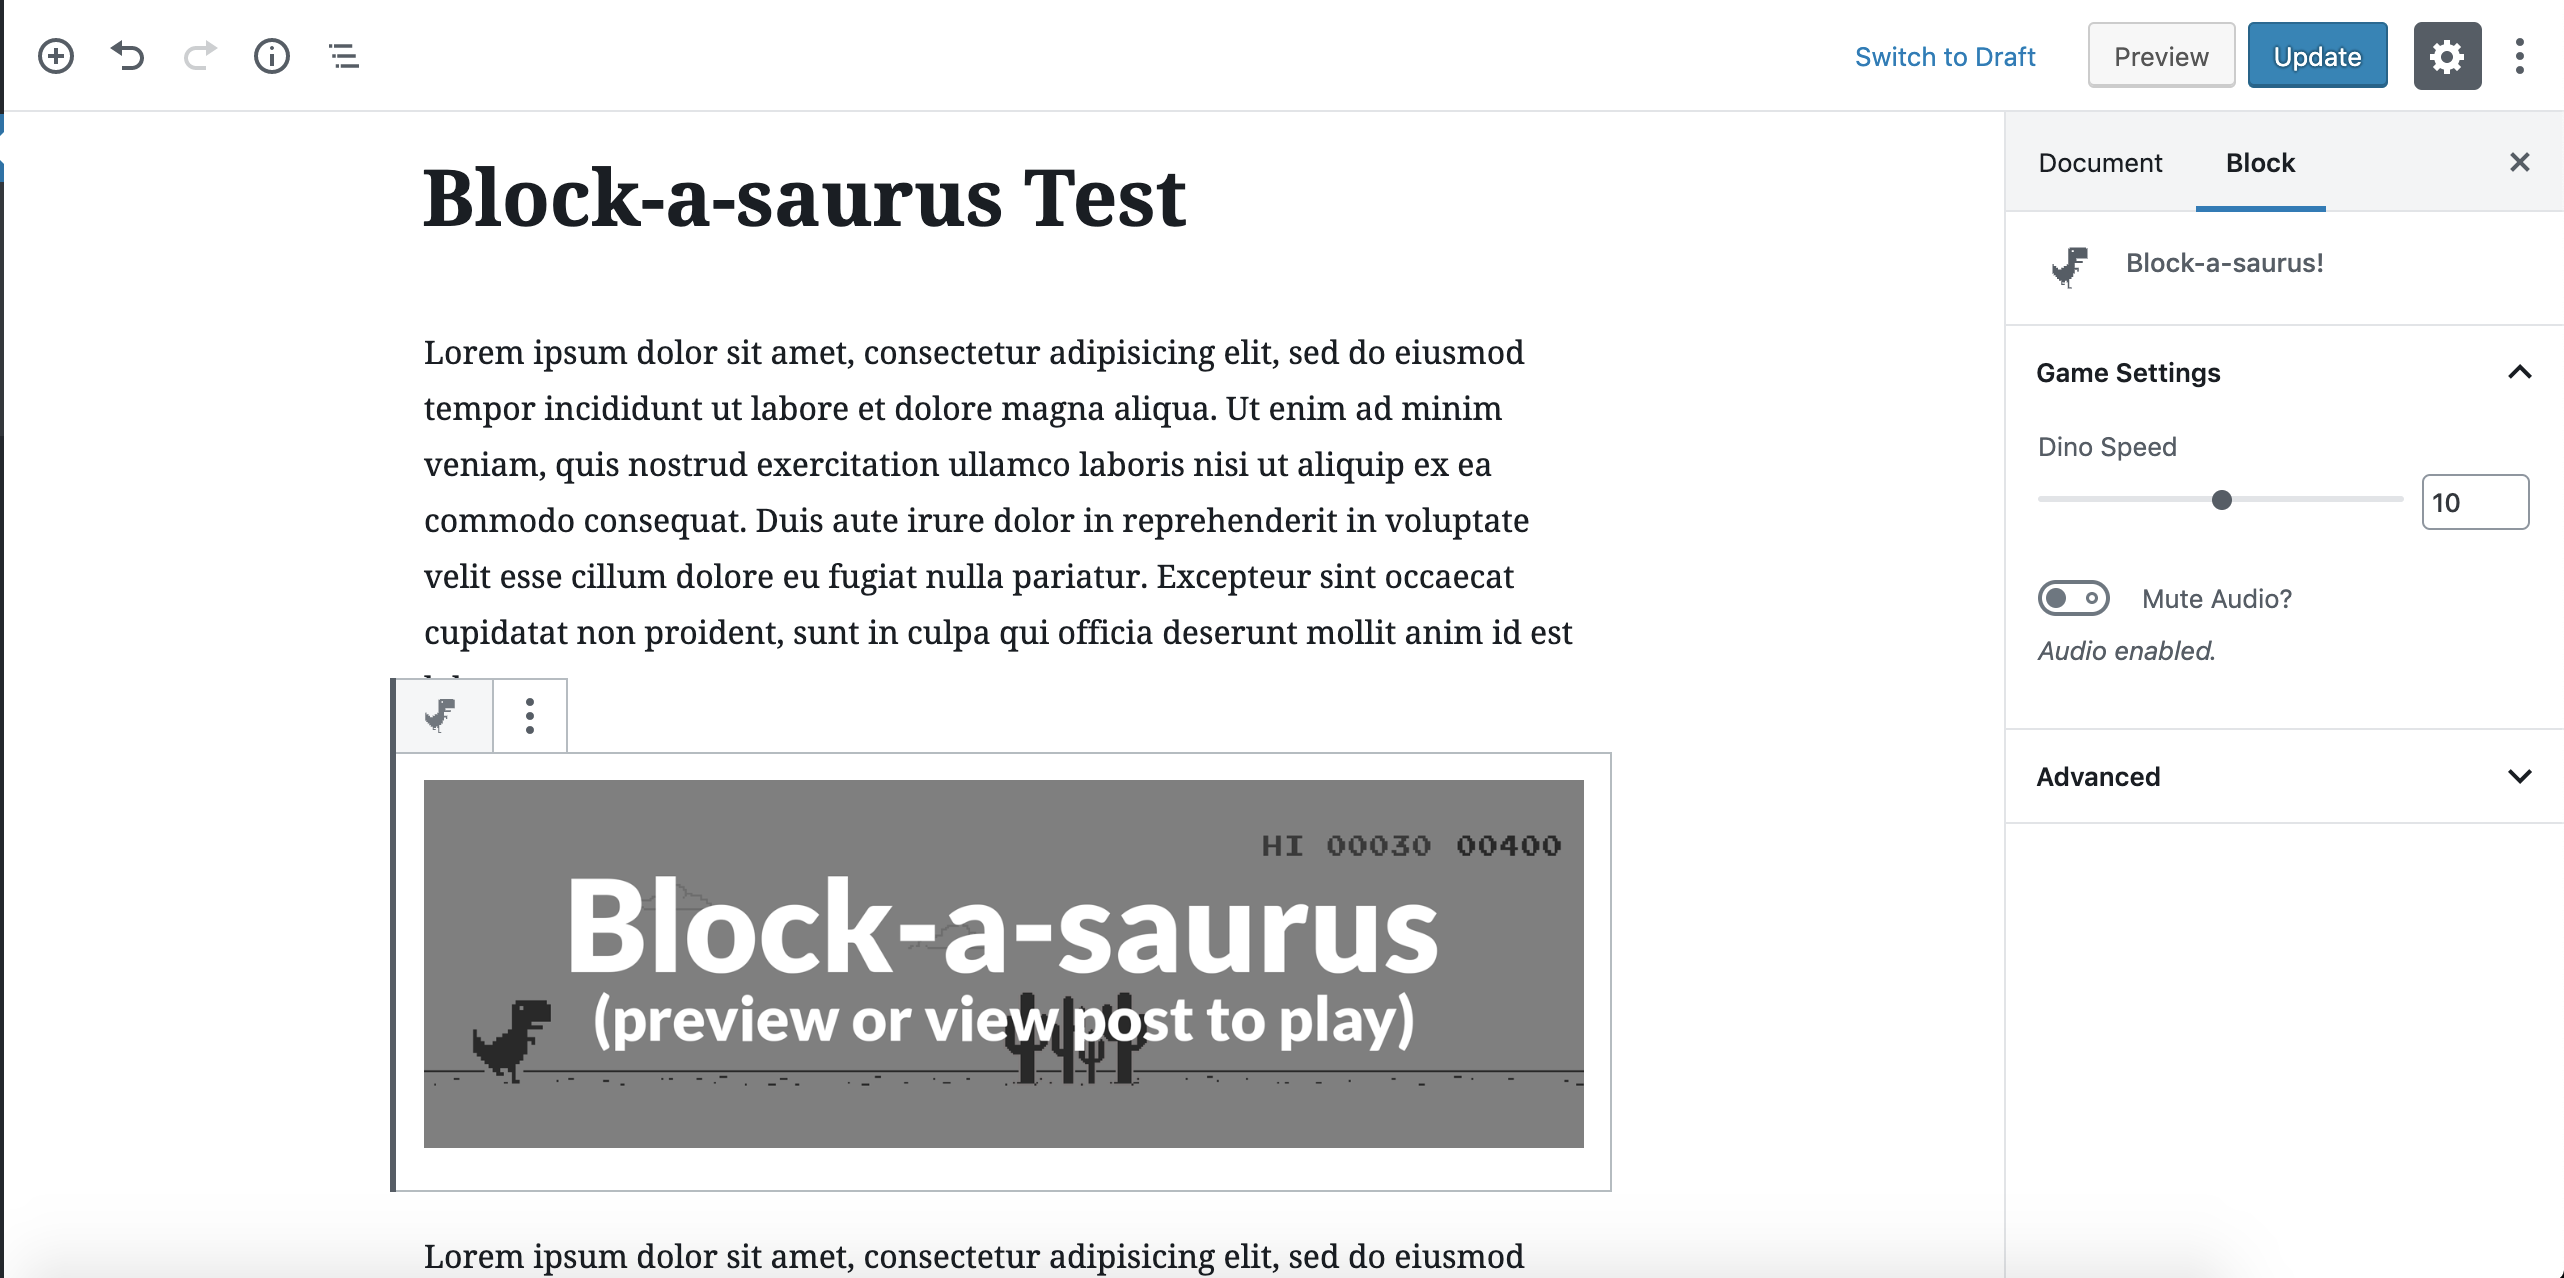 A view of the Block-a-saurus plugin from within the editor